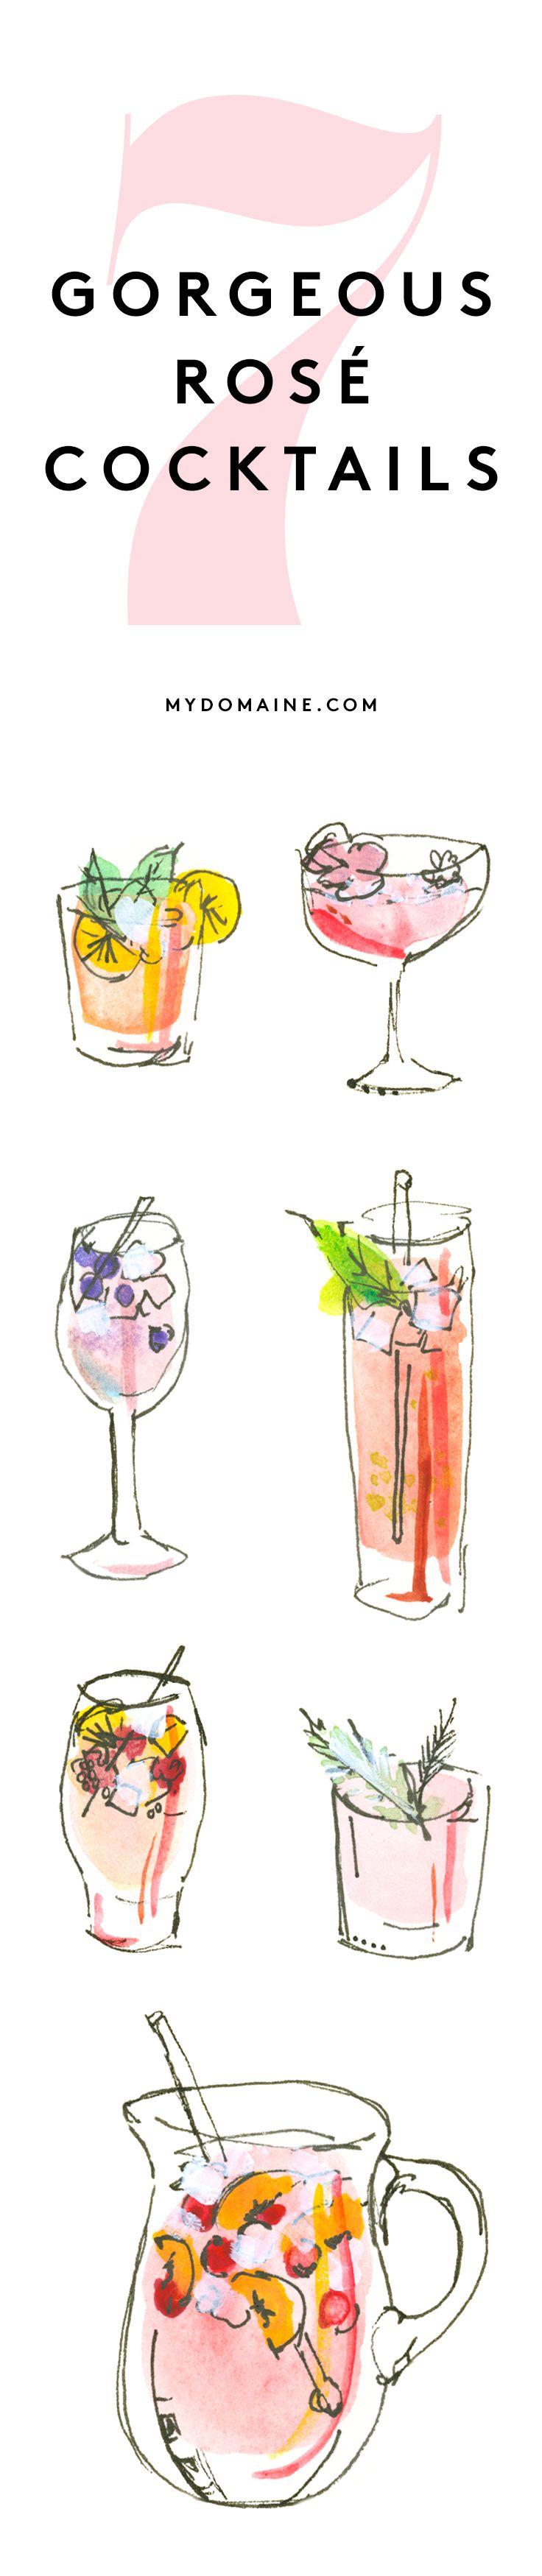 Wedding - 7 Delicious Rosé Cocktails To Up Your Hosting Game